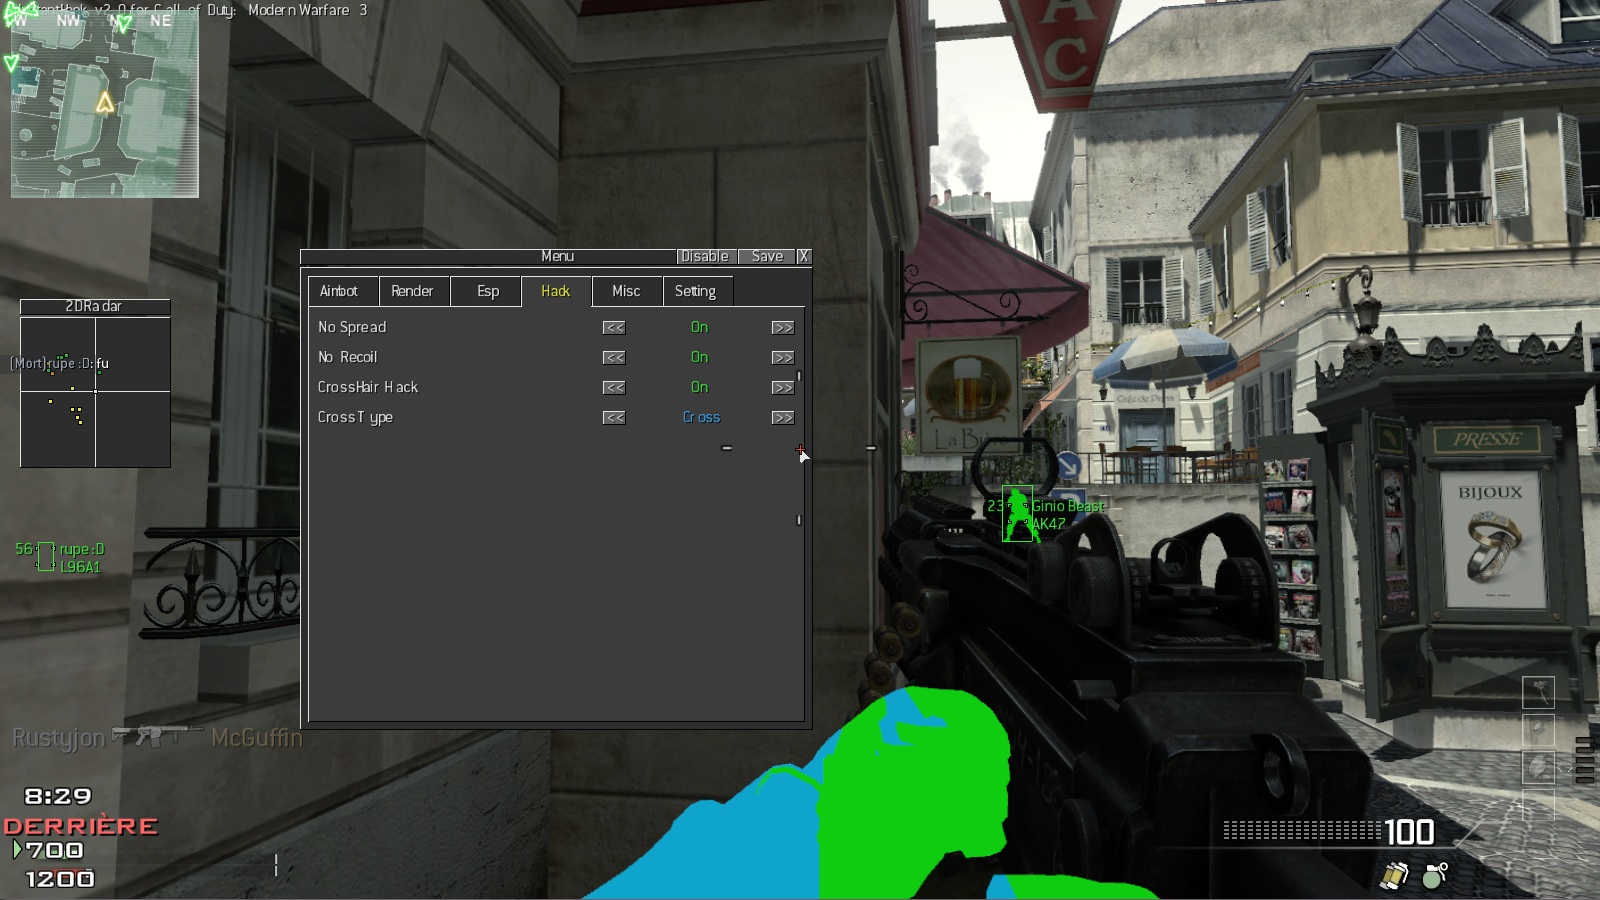 Call Of Duty Modern Warfare Hack Aimbot Esp Wallhack Cod Mw Cheats Download 1 13 - wall hack on any roblox game mac only